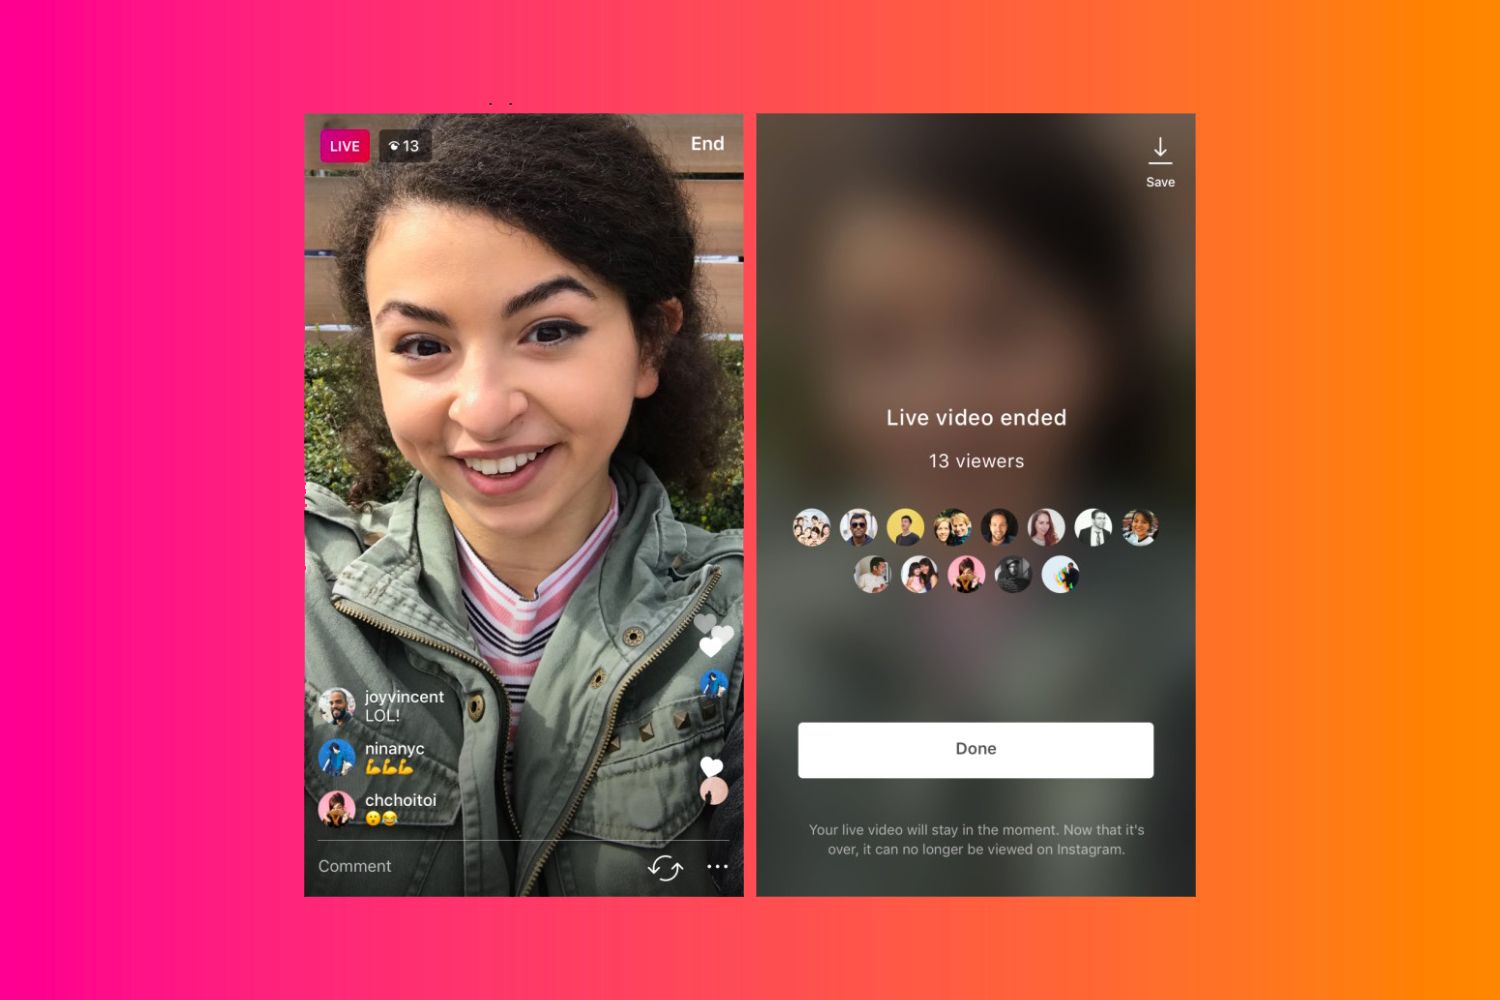 instagram now lets you save live videos here s how to do it image 1